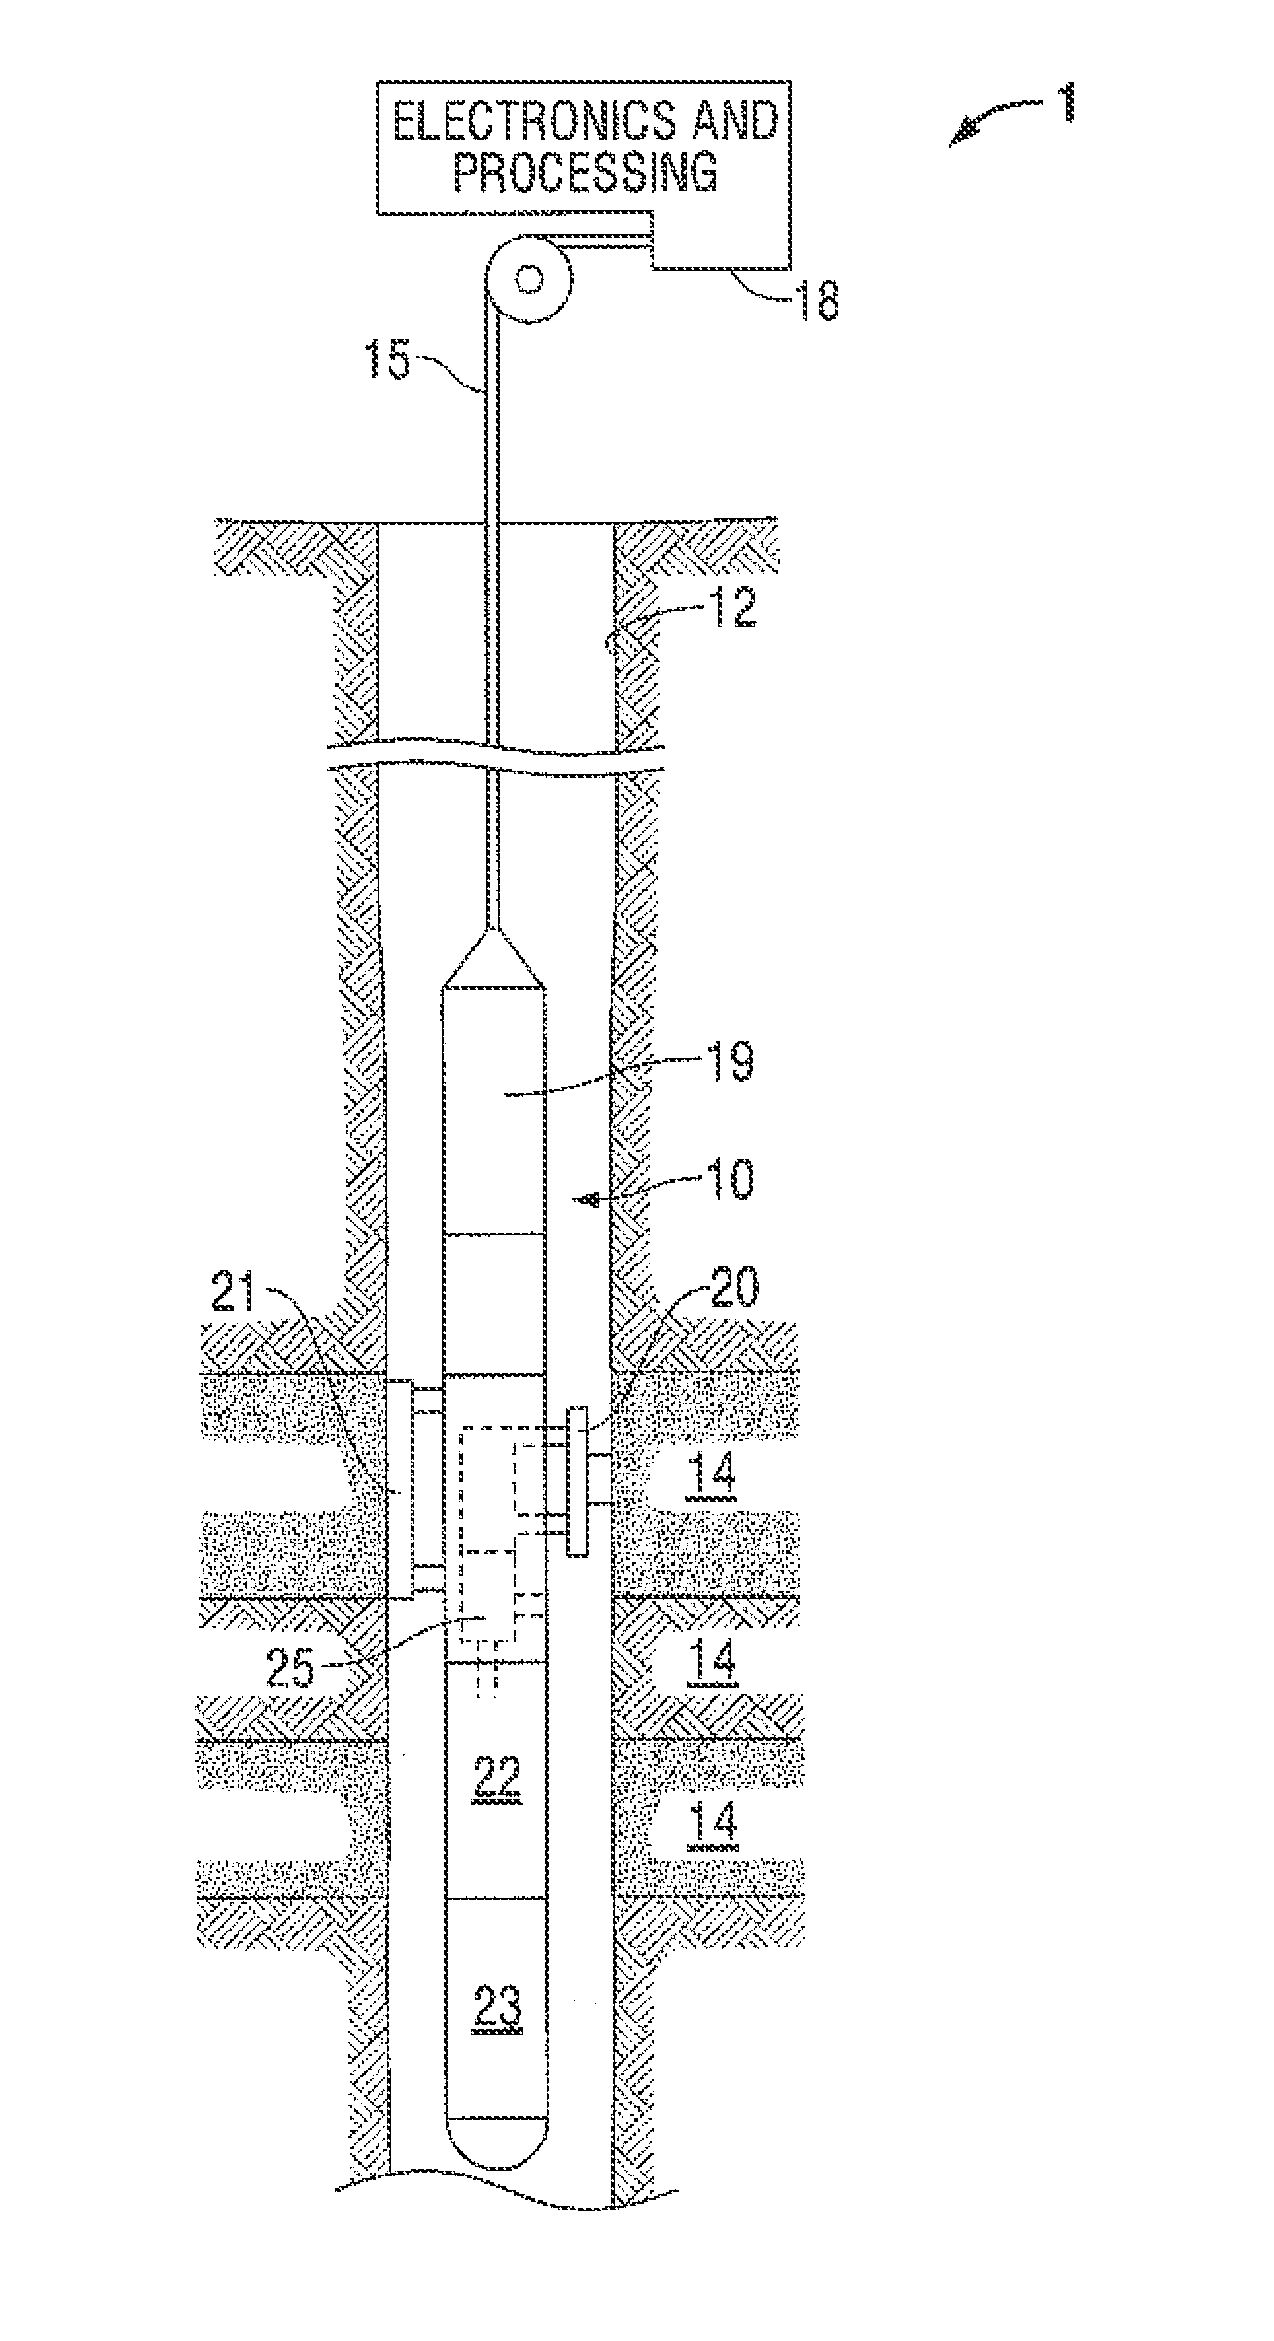 Methods and apparatus for characterization of petroleum fluid employing analysis of high molecular weight components